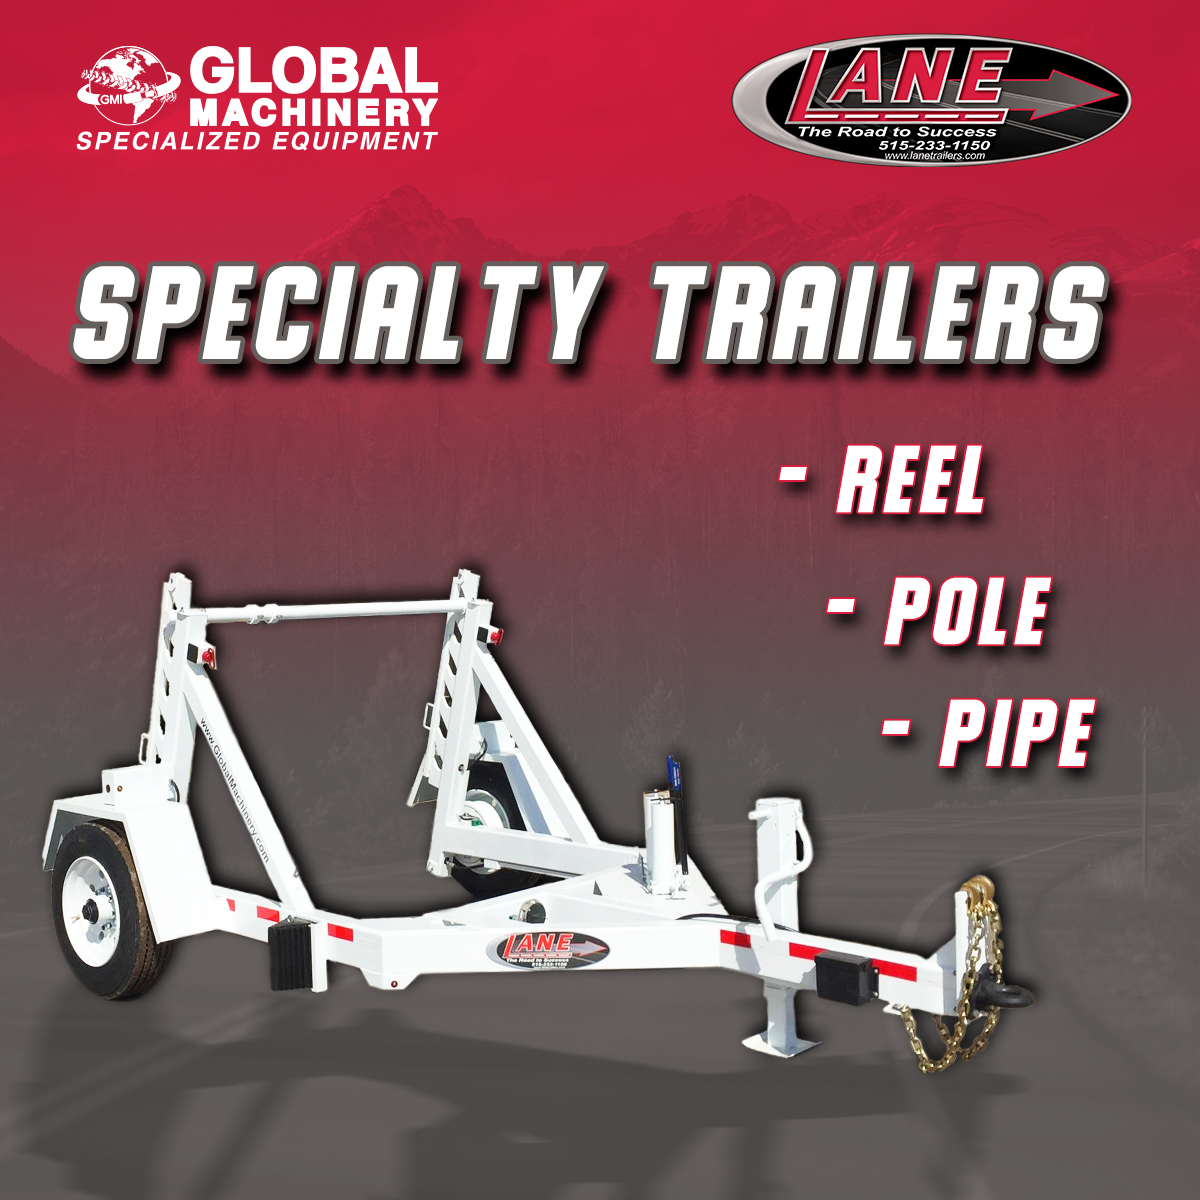 Utility trailers for every job. We have pole trailers, reel trailers, coiled pipe,  and multi-reel trailers; along with tons of others! 

#utility #california #idaho #colorado #oregon #lineconstruction #rentalequipment #utilityequipment #truckpaper #machinerytrader